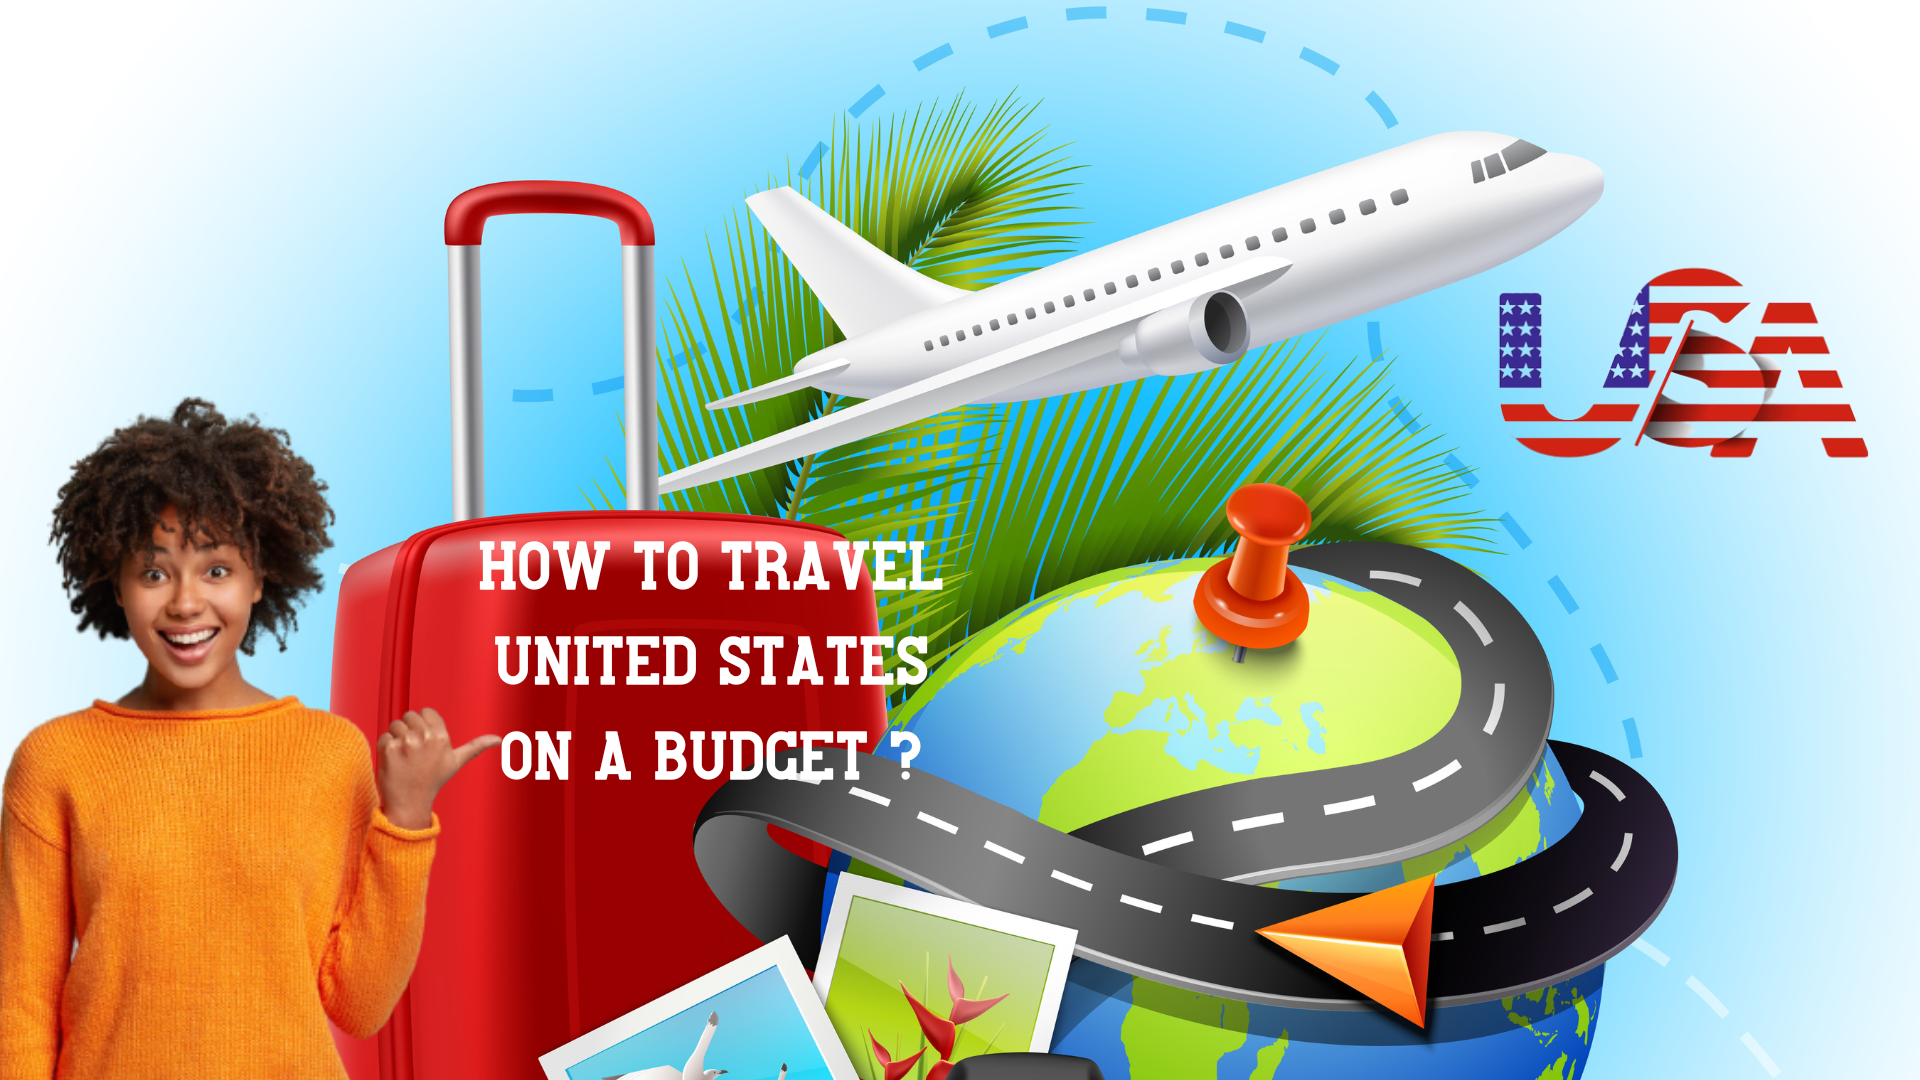 How to Travel United States on a Budget